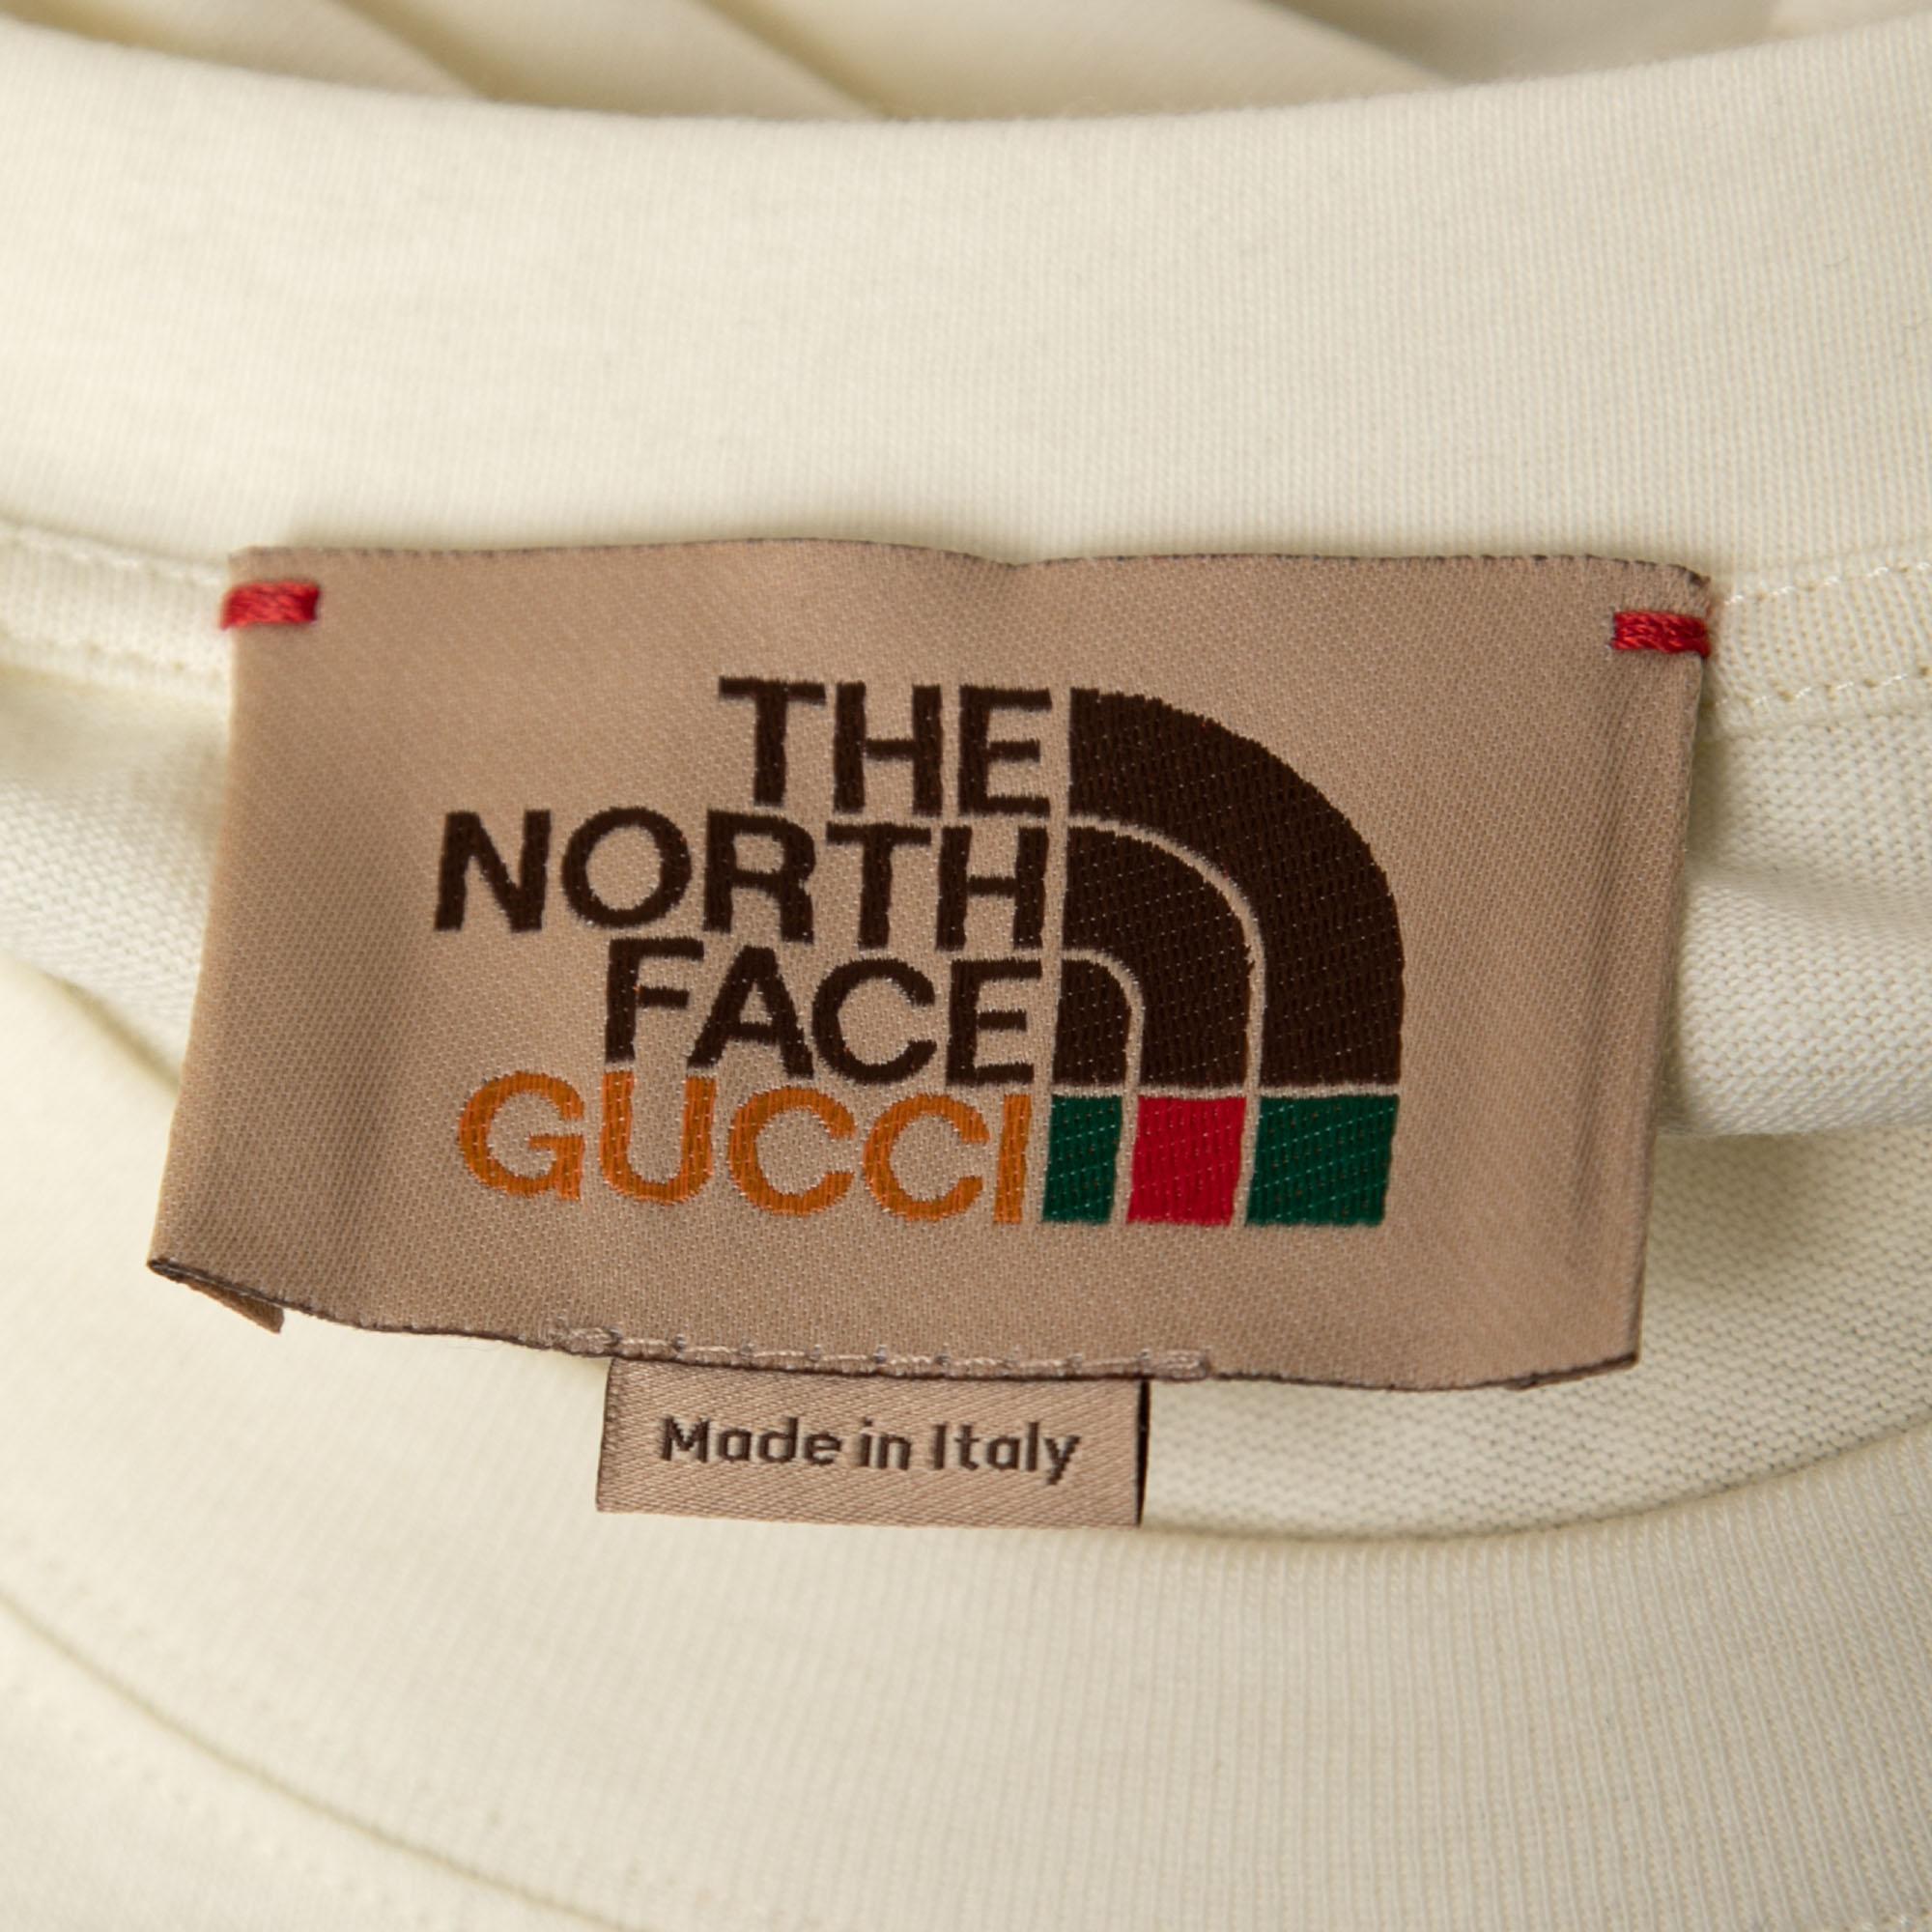 the north face gucci t-shirt